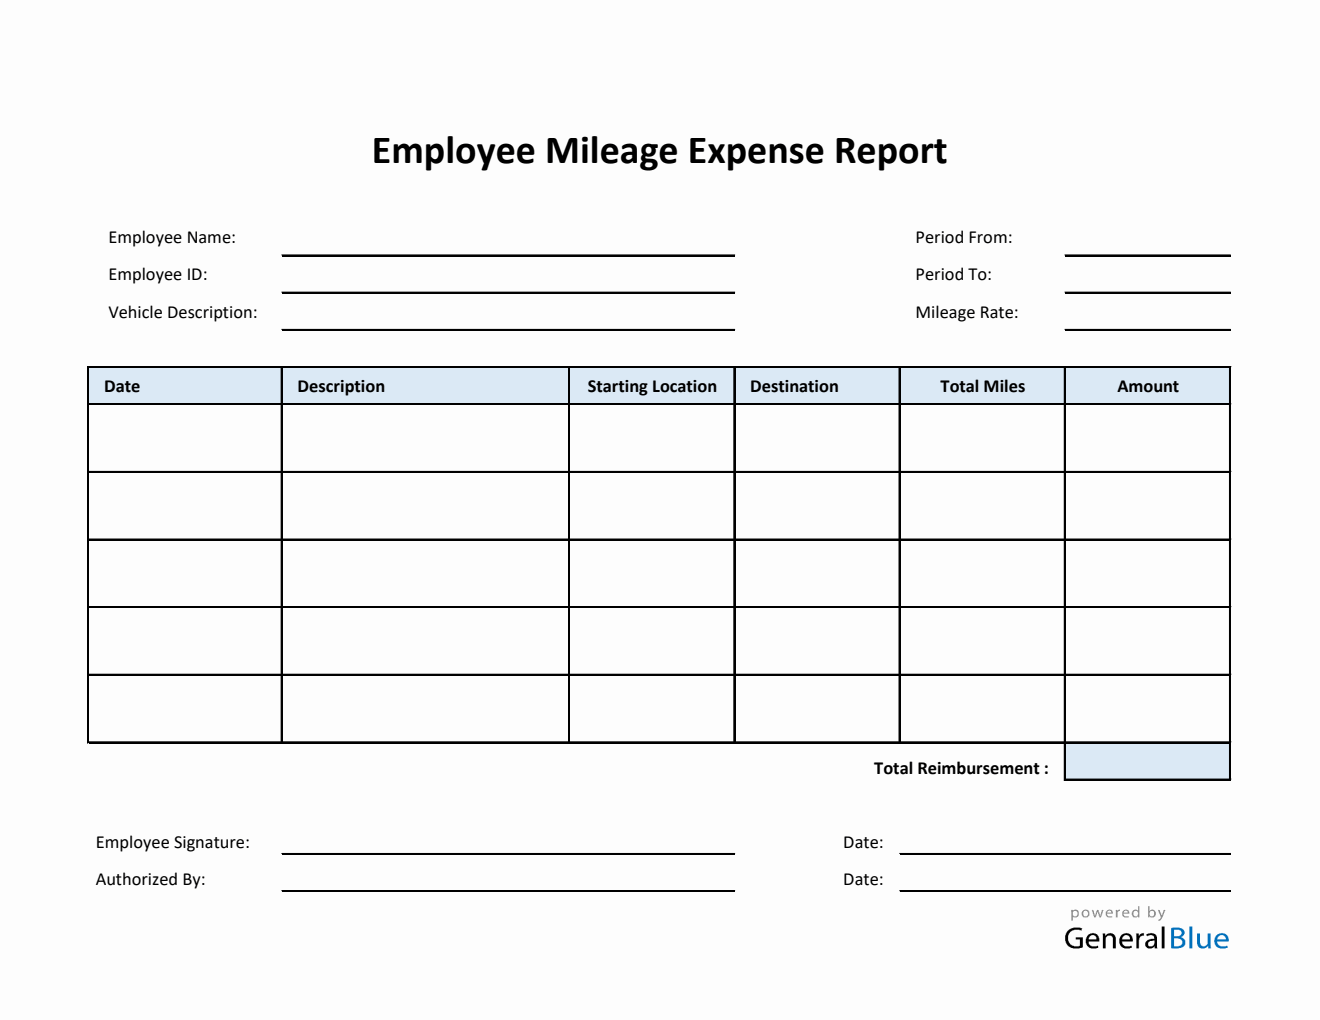 Employee Mileage Expense Report Template in Excel